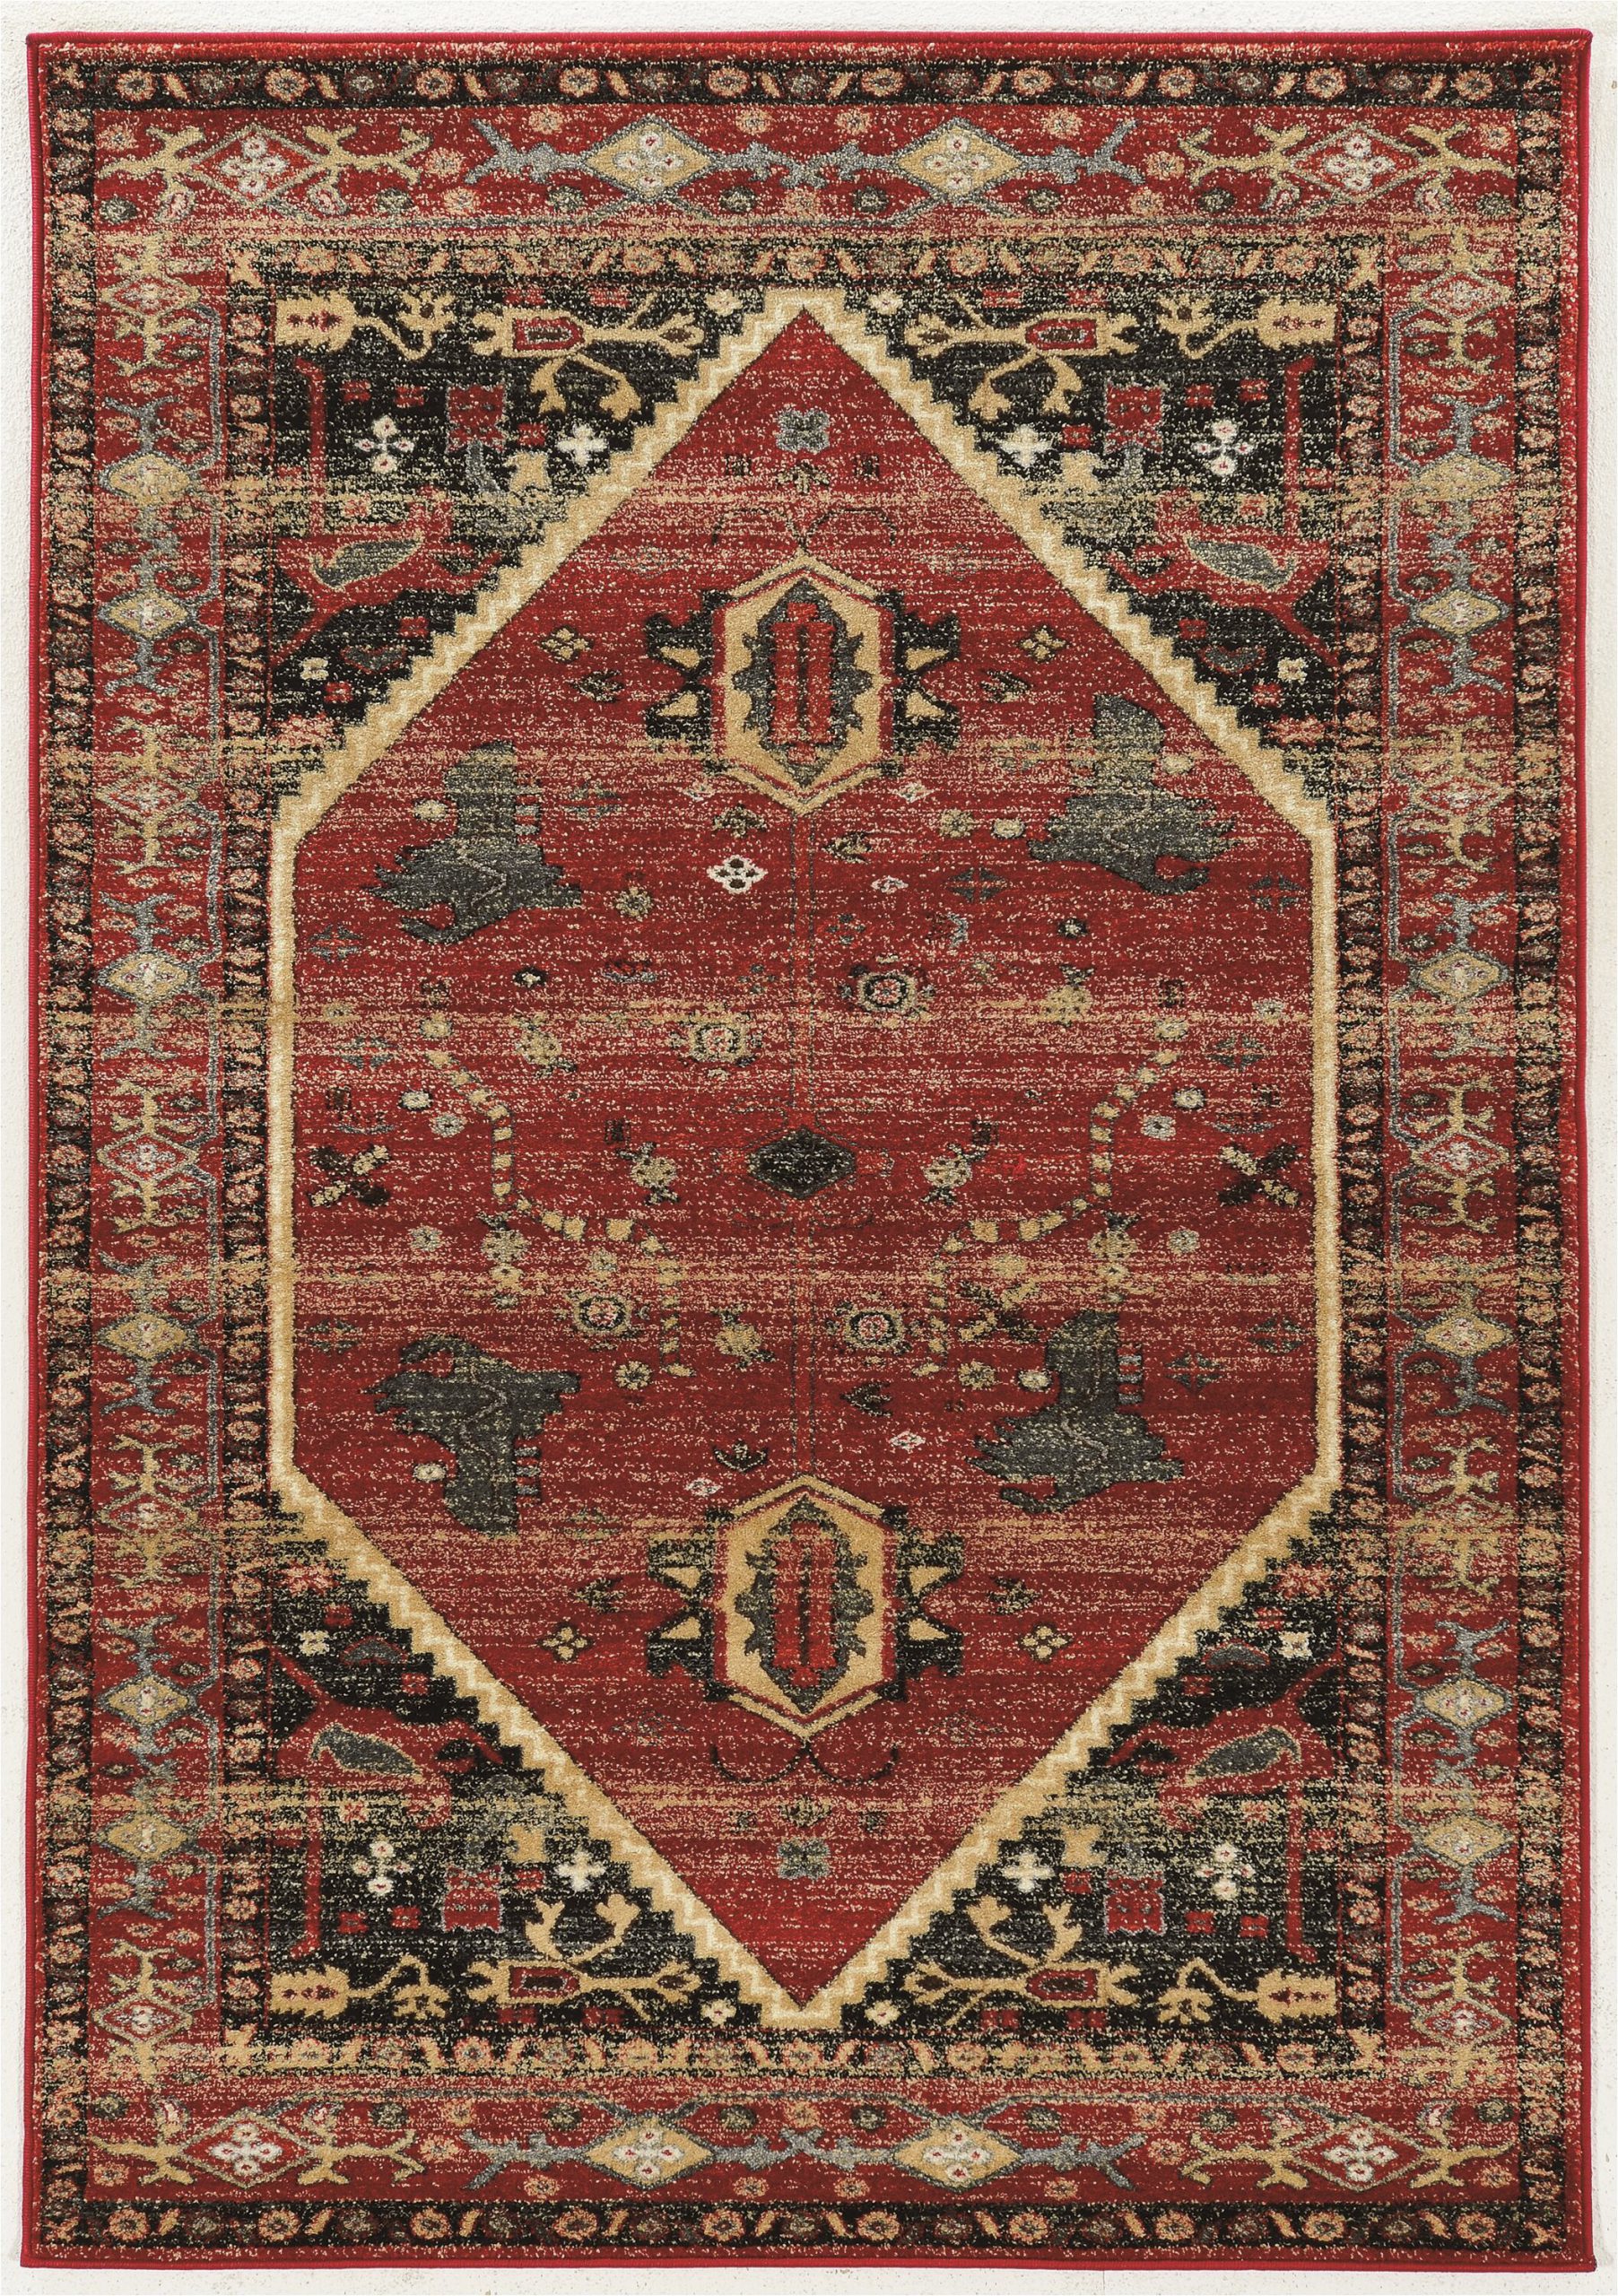 Red Black and Beige area Rugs Shelie Hexagon Red Black Beige area Rug